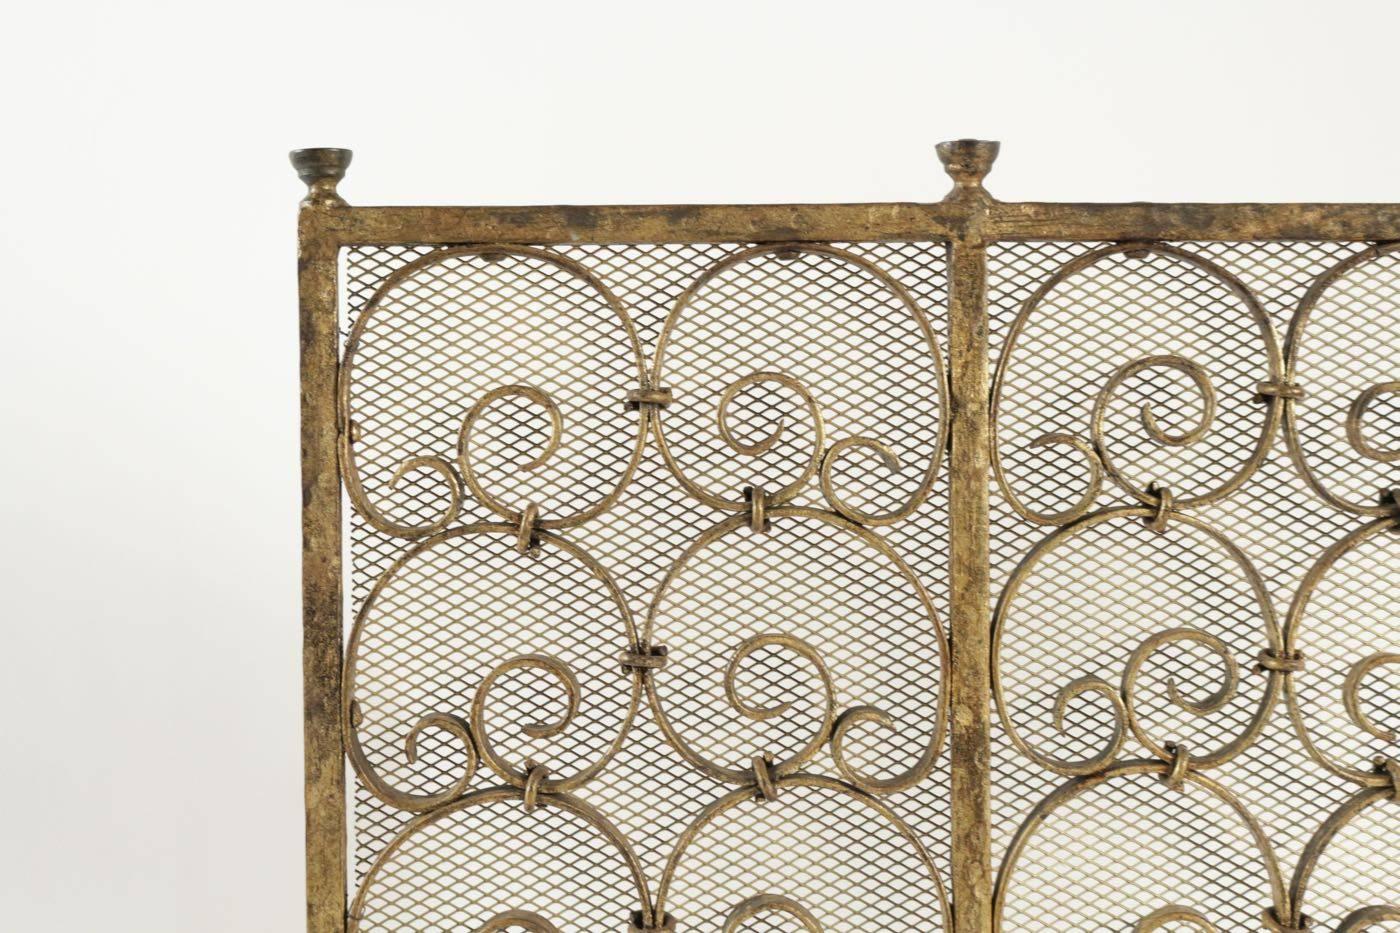 Fireplace screen in gold gilded wrought iron, 20th century.
 